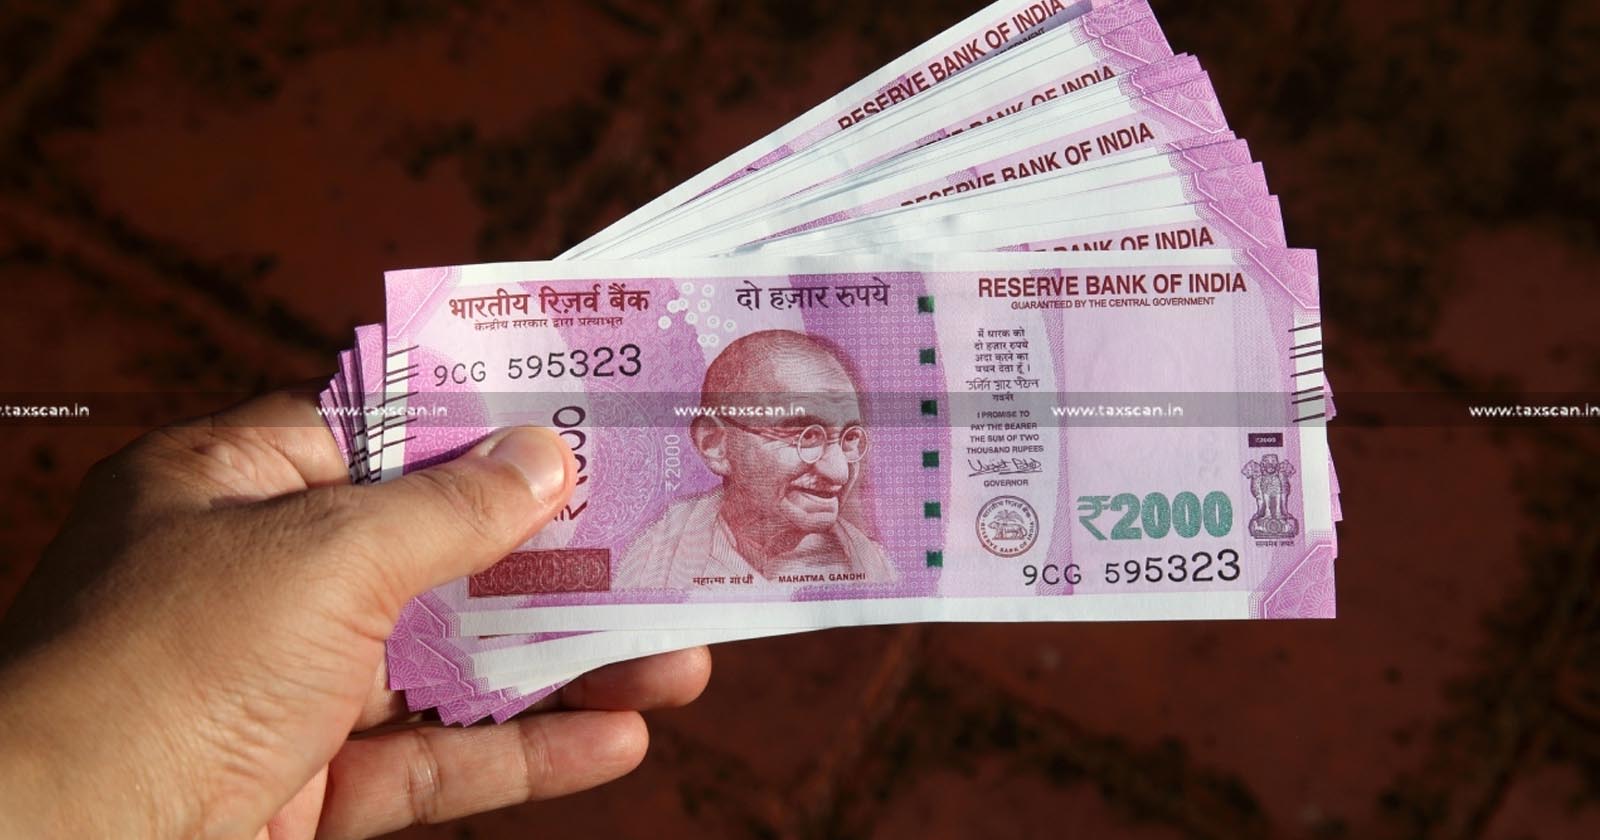 RBI releases - Status of Withdrawal of Rs. 2000 banknotes - Withdrawal of Rs. 2000 banknotes- 2000 banknotes - taxscan